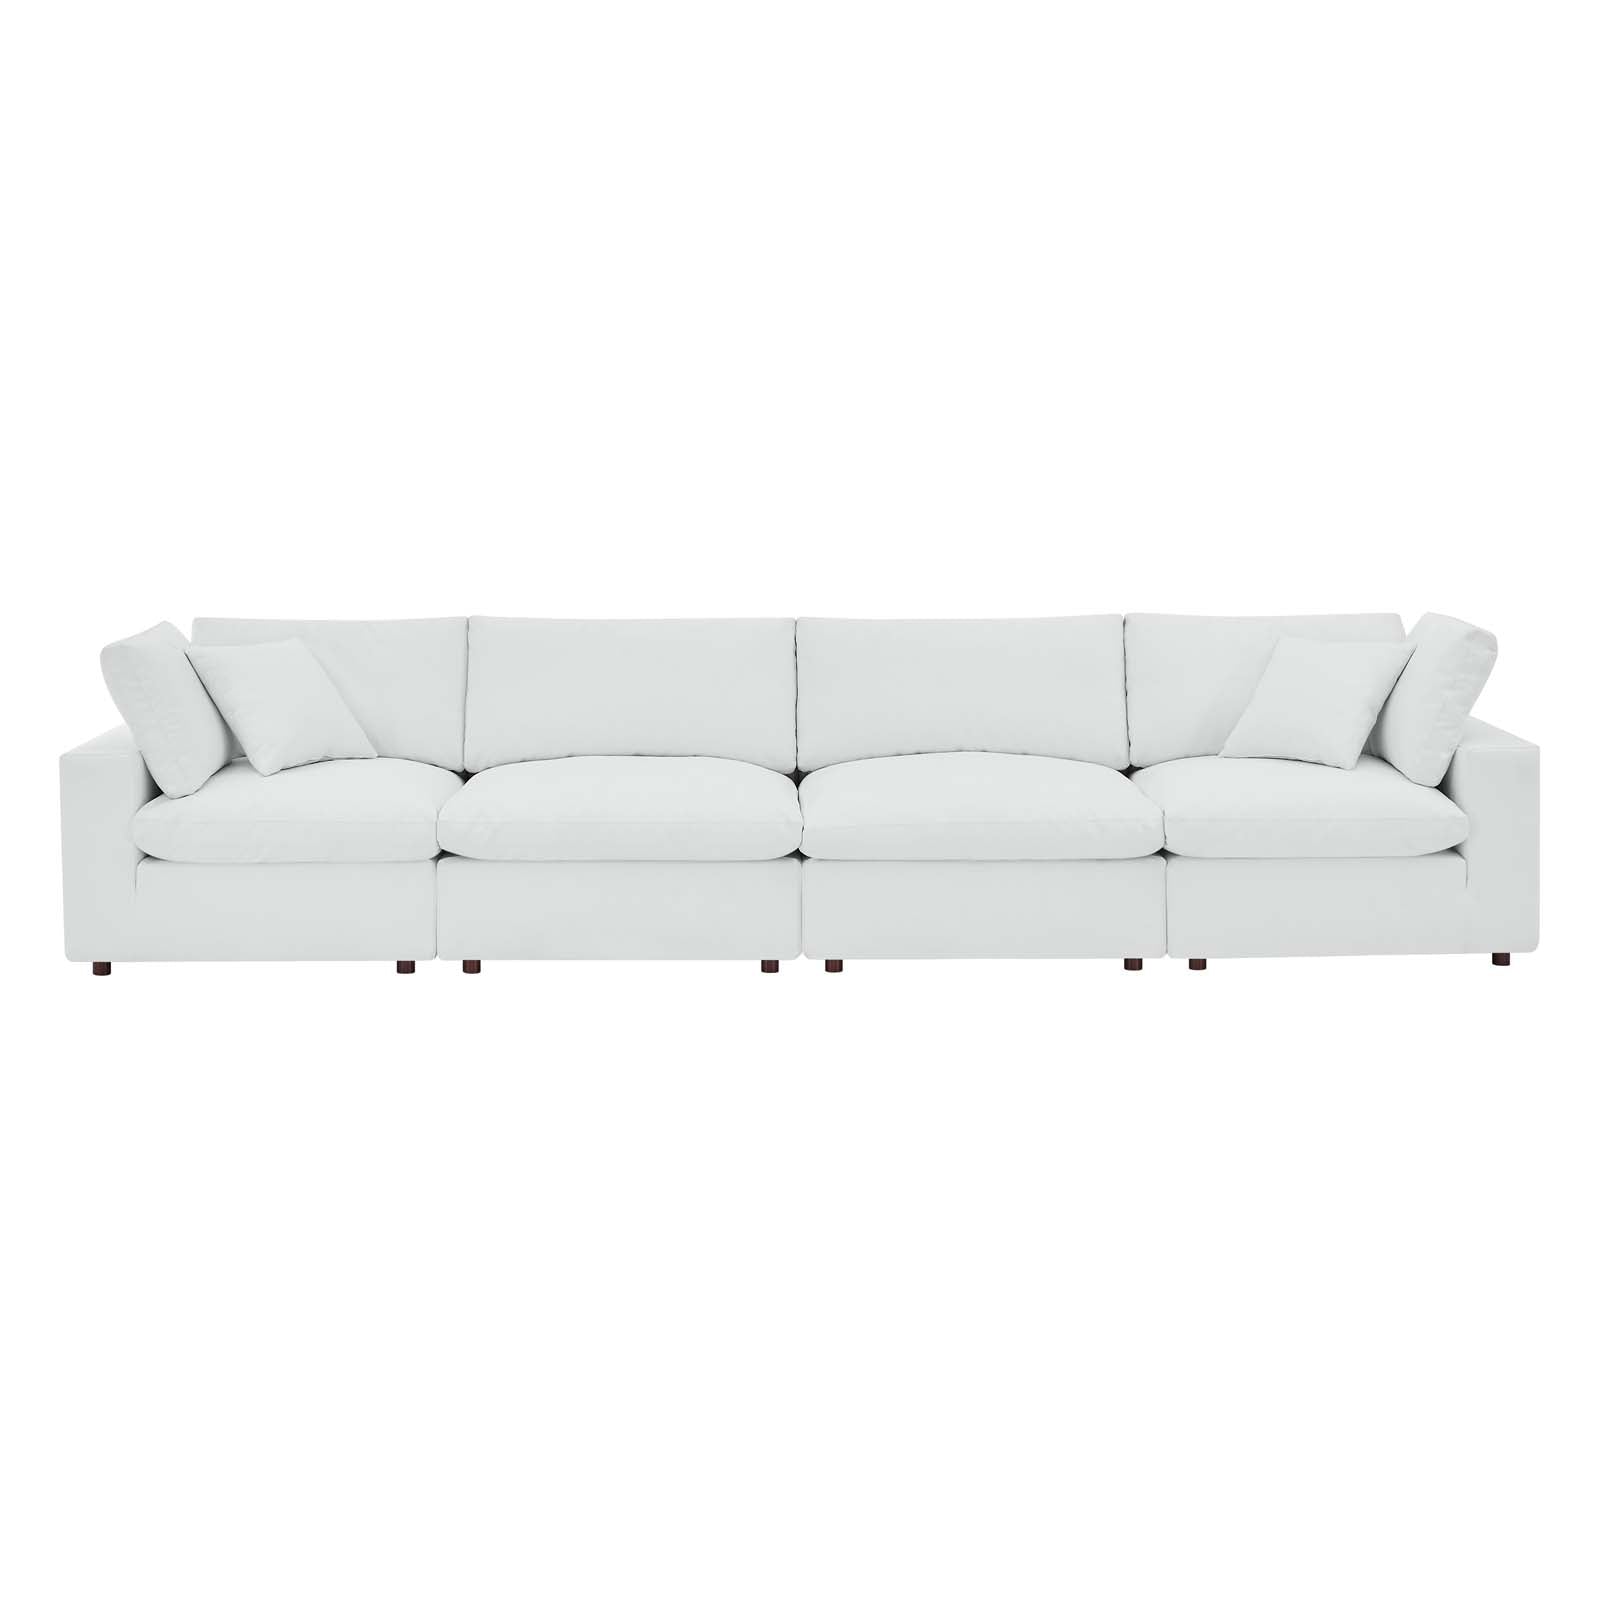 Modway Sofas & Couches - Commix Down Filled Overstuffed Vegan Leather 4 Seater Sofa White